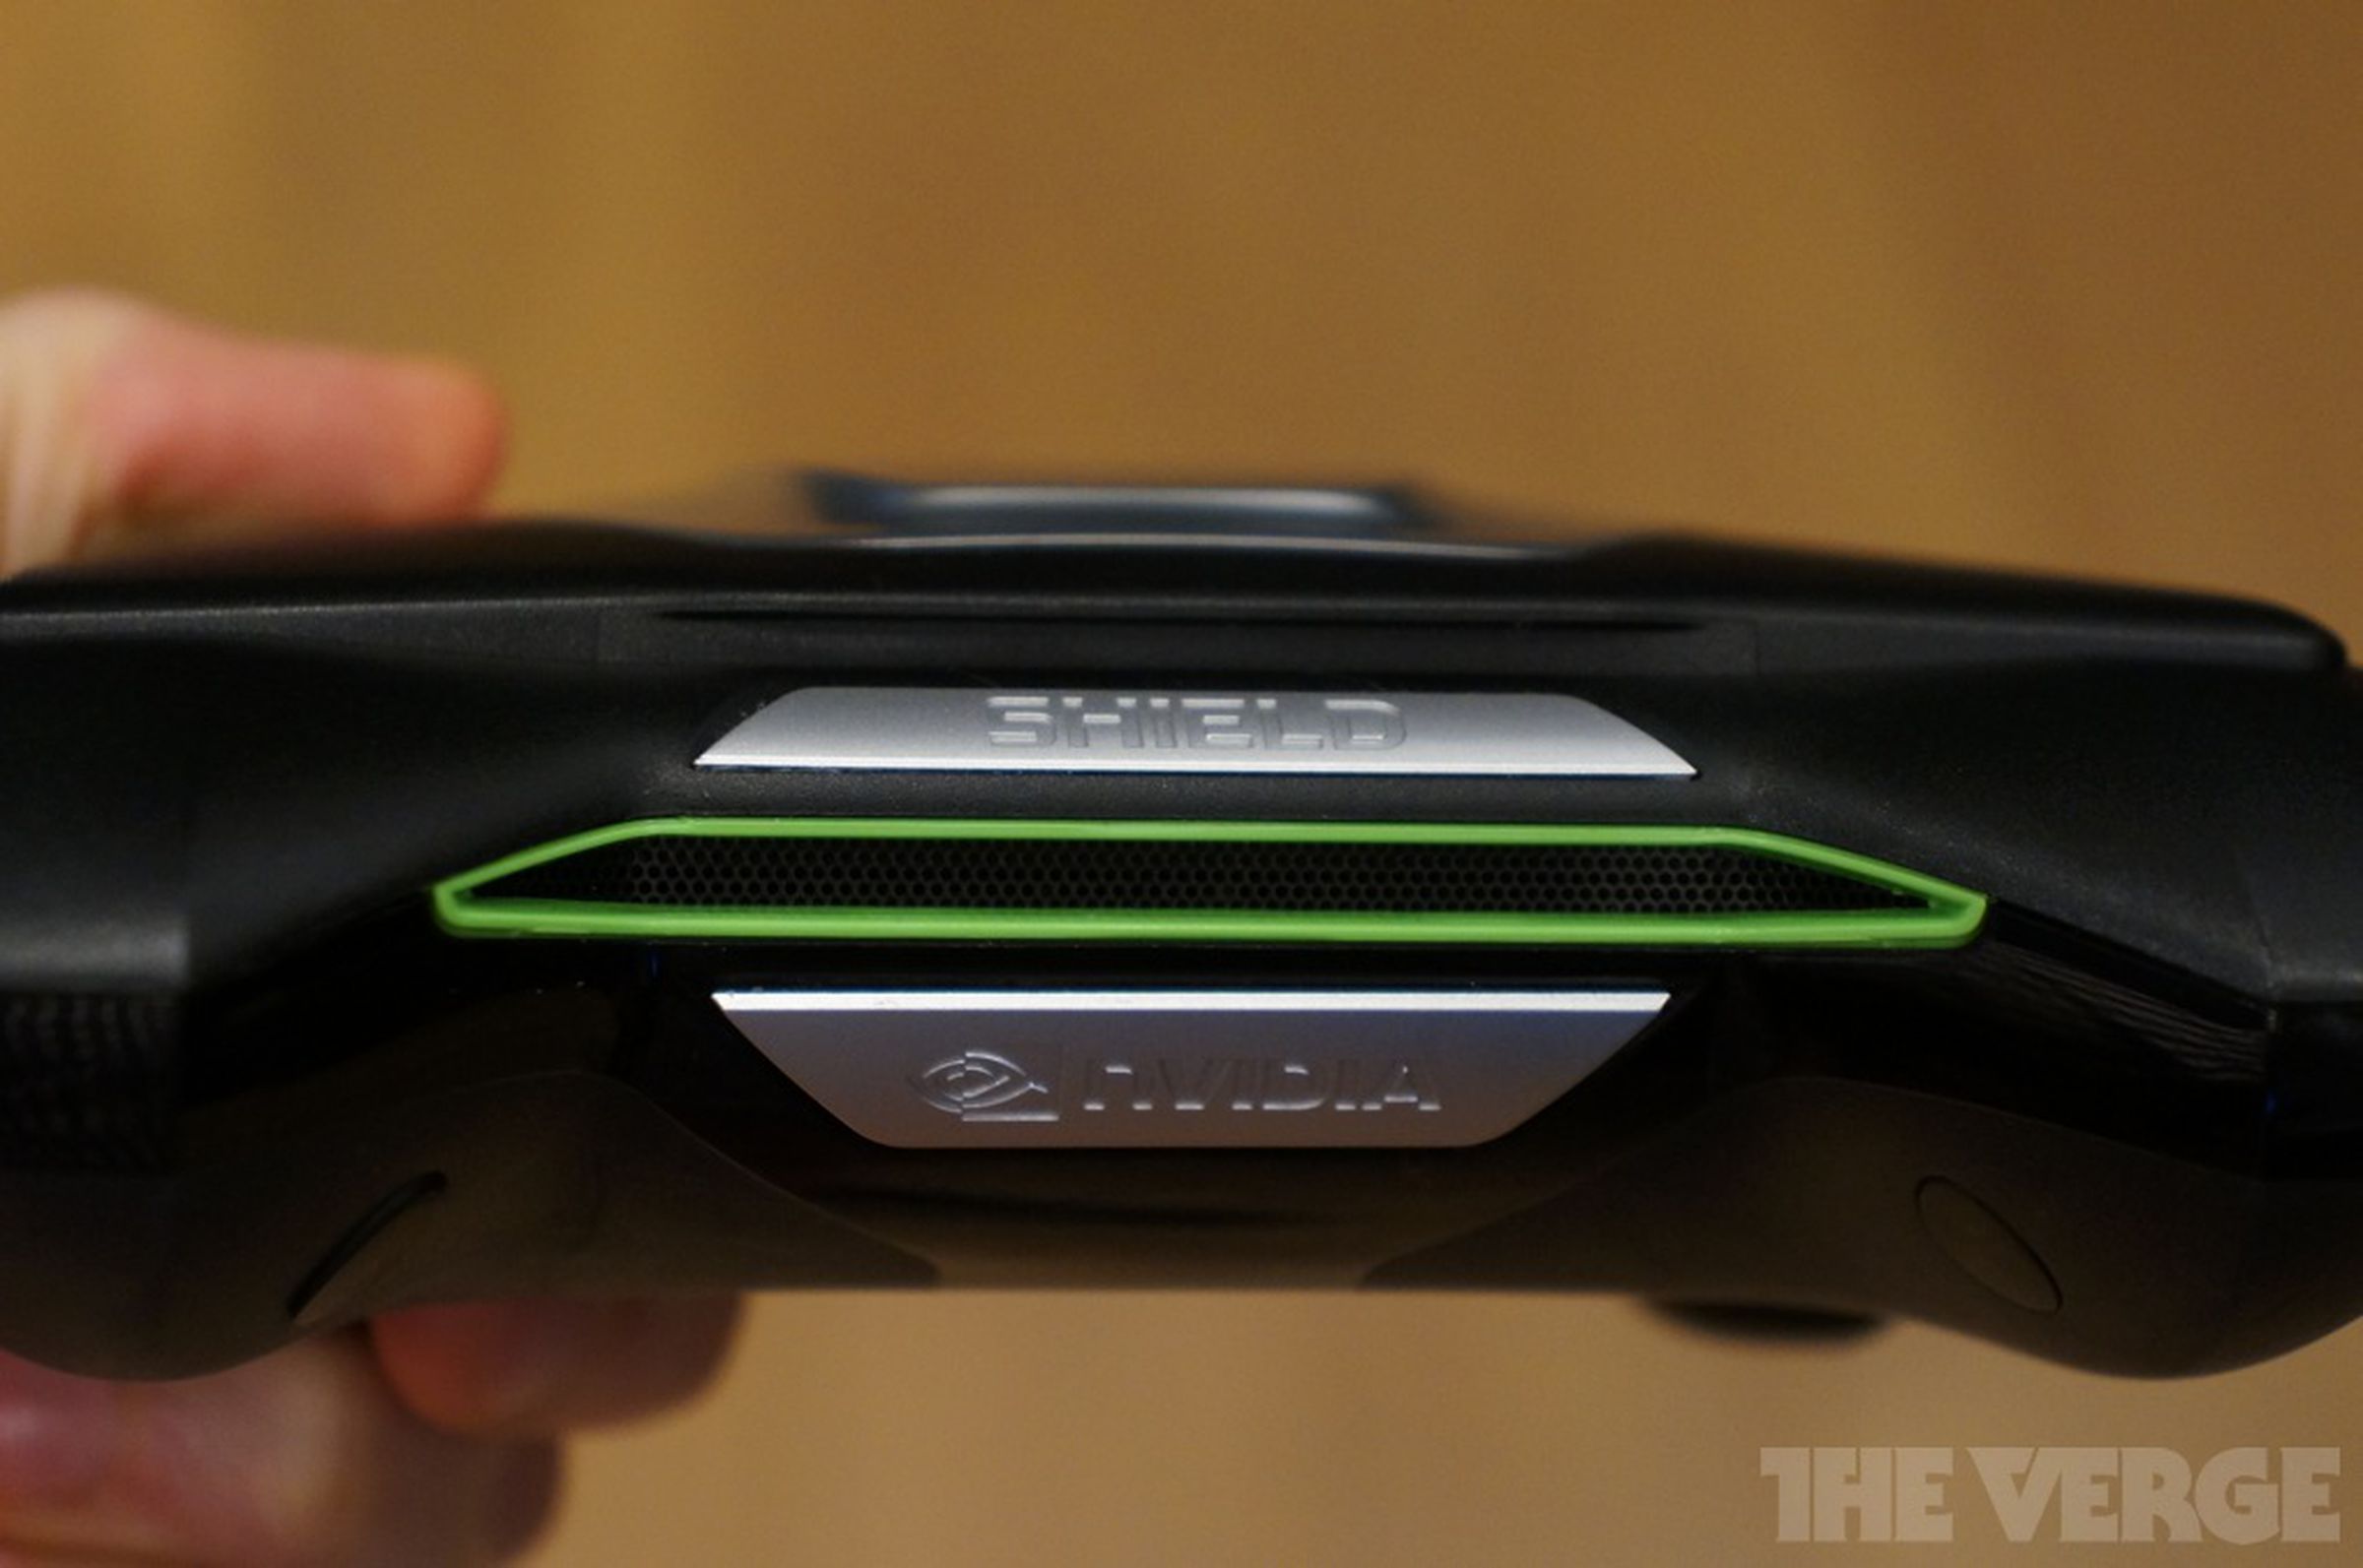 Nvidia Shield first production unit (hands-on)